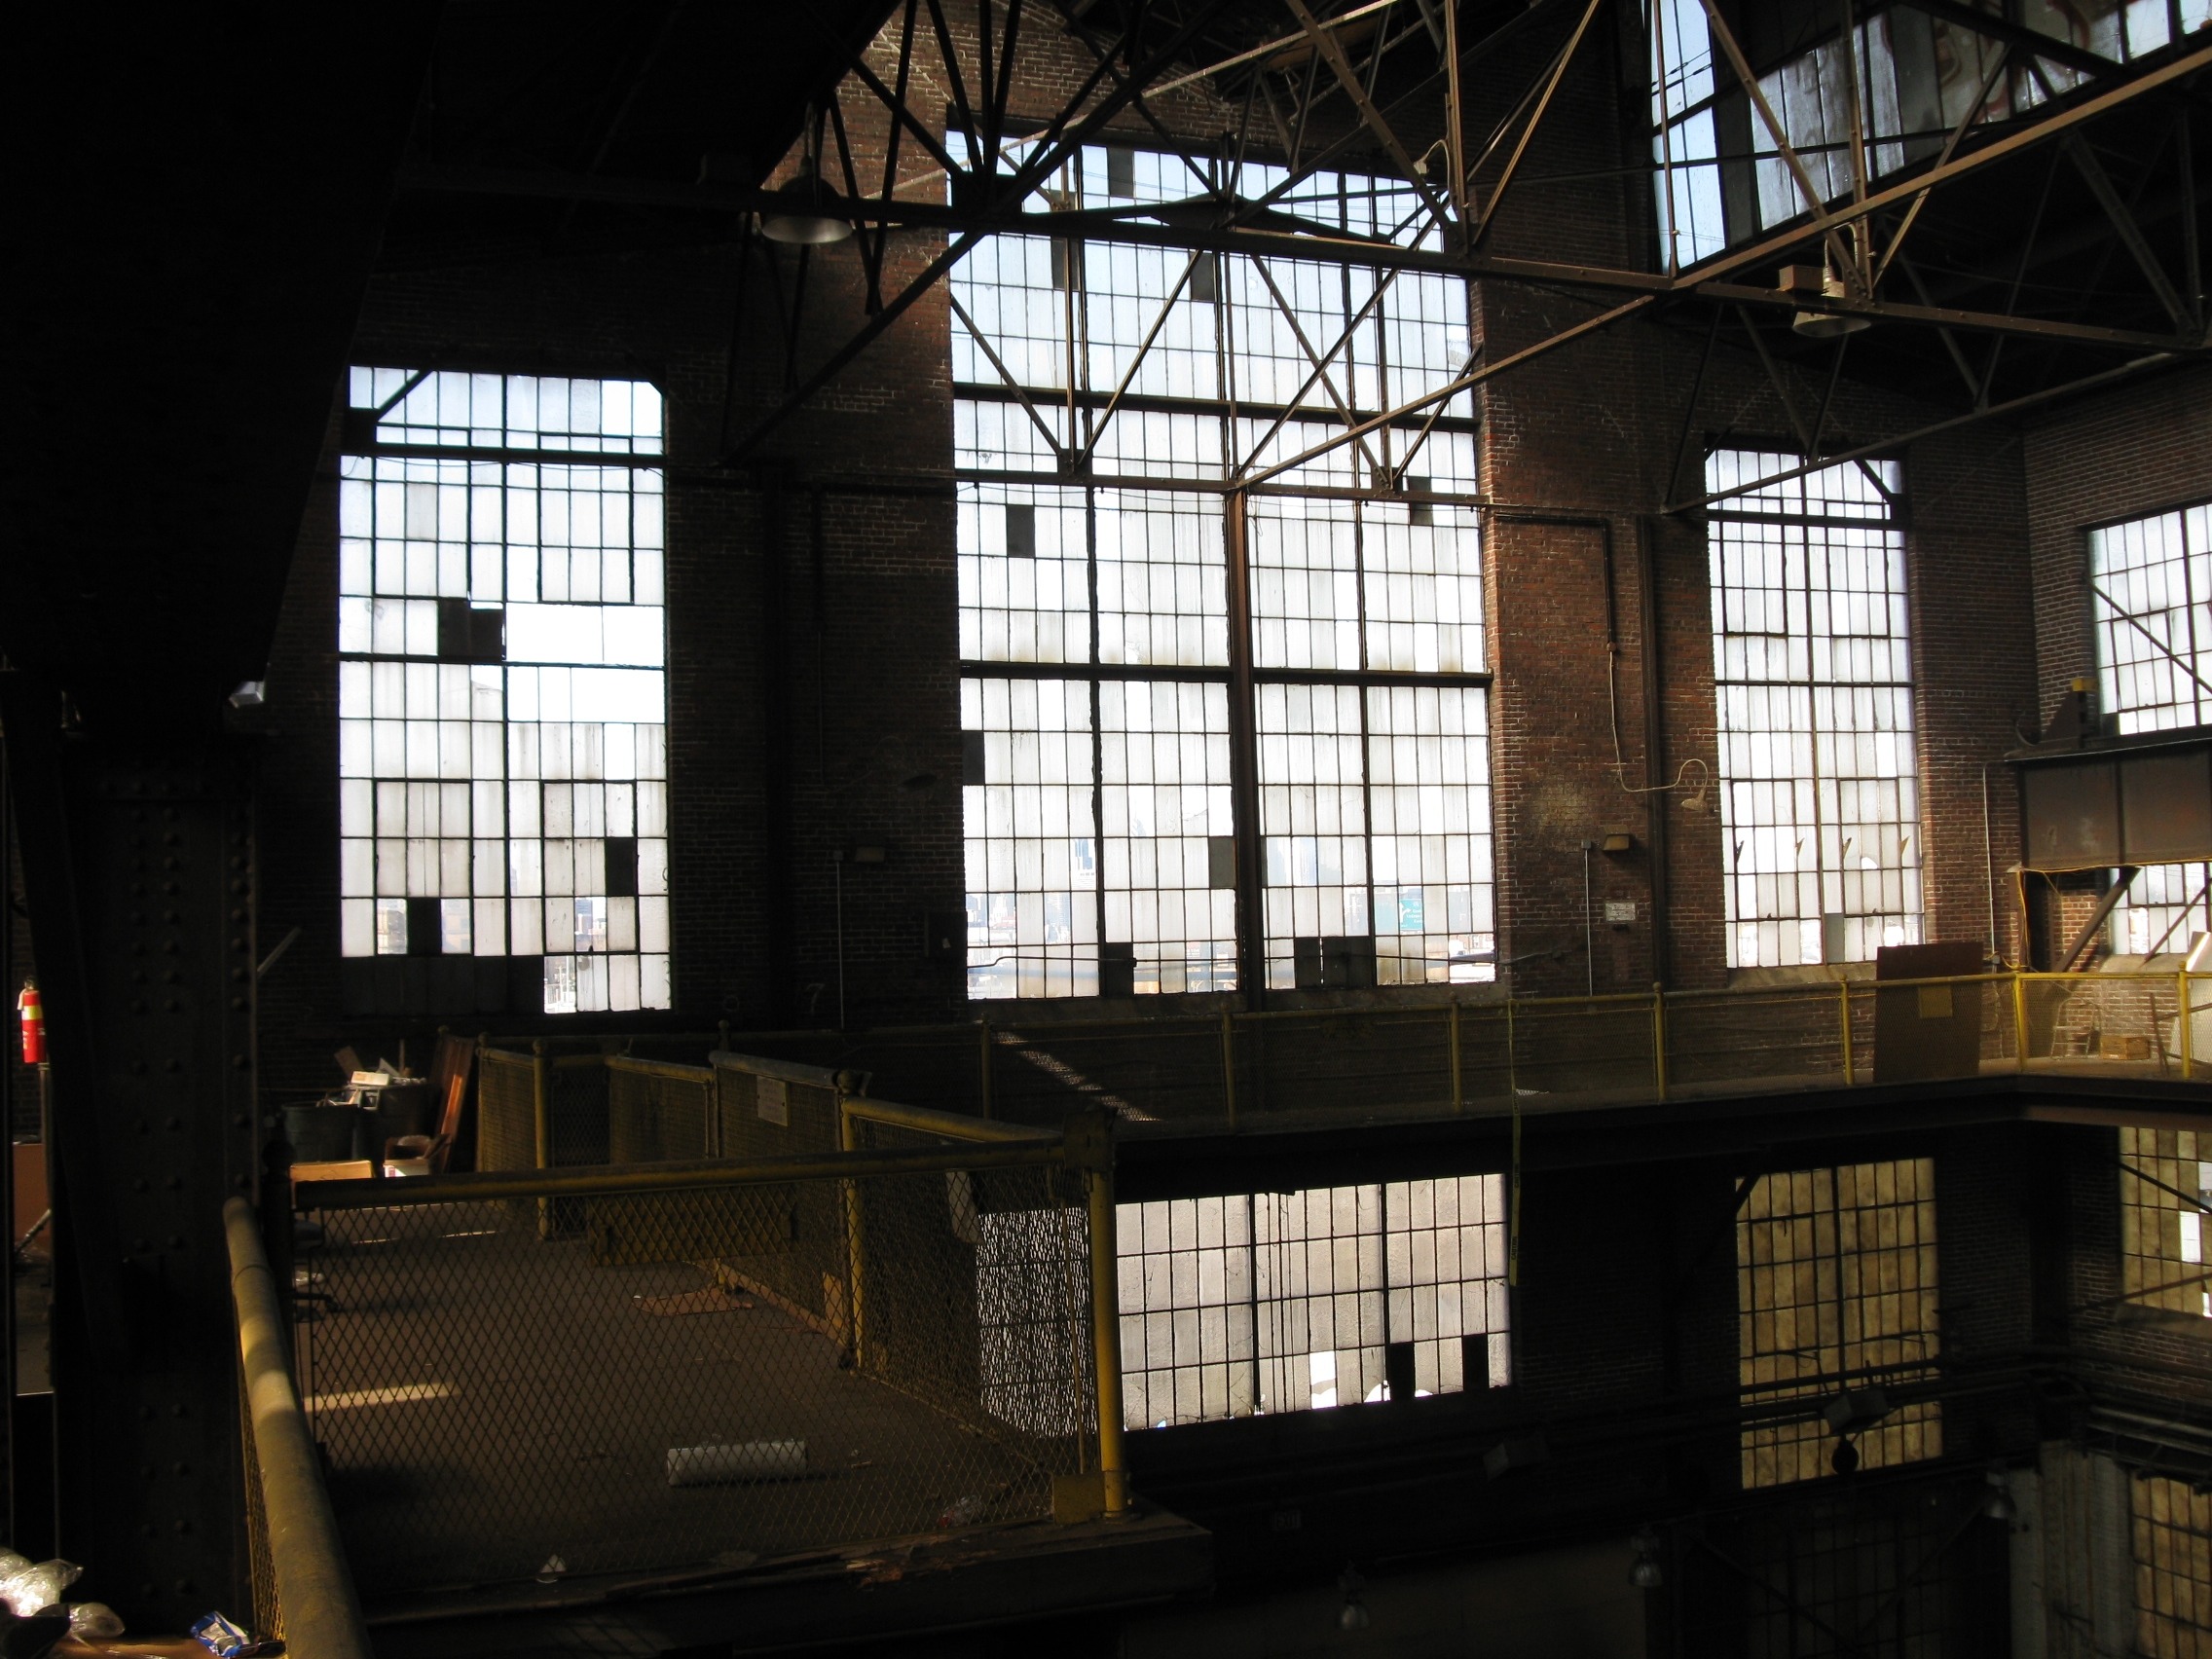 View south of front facade windows from Gallery Level / photo courtesy PennDOT